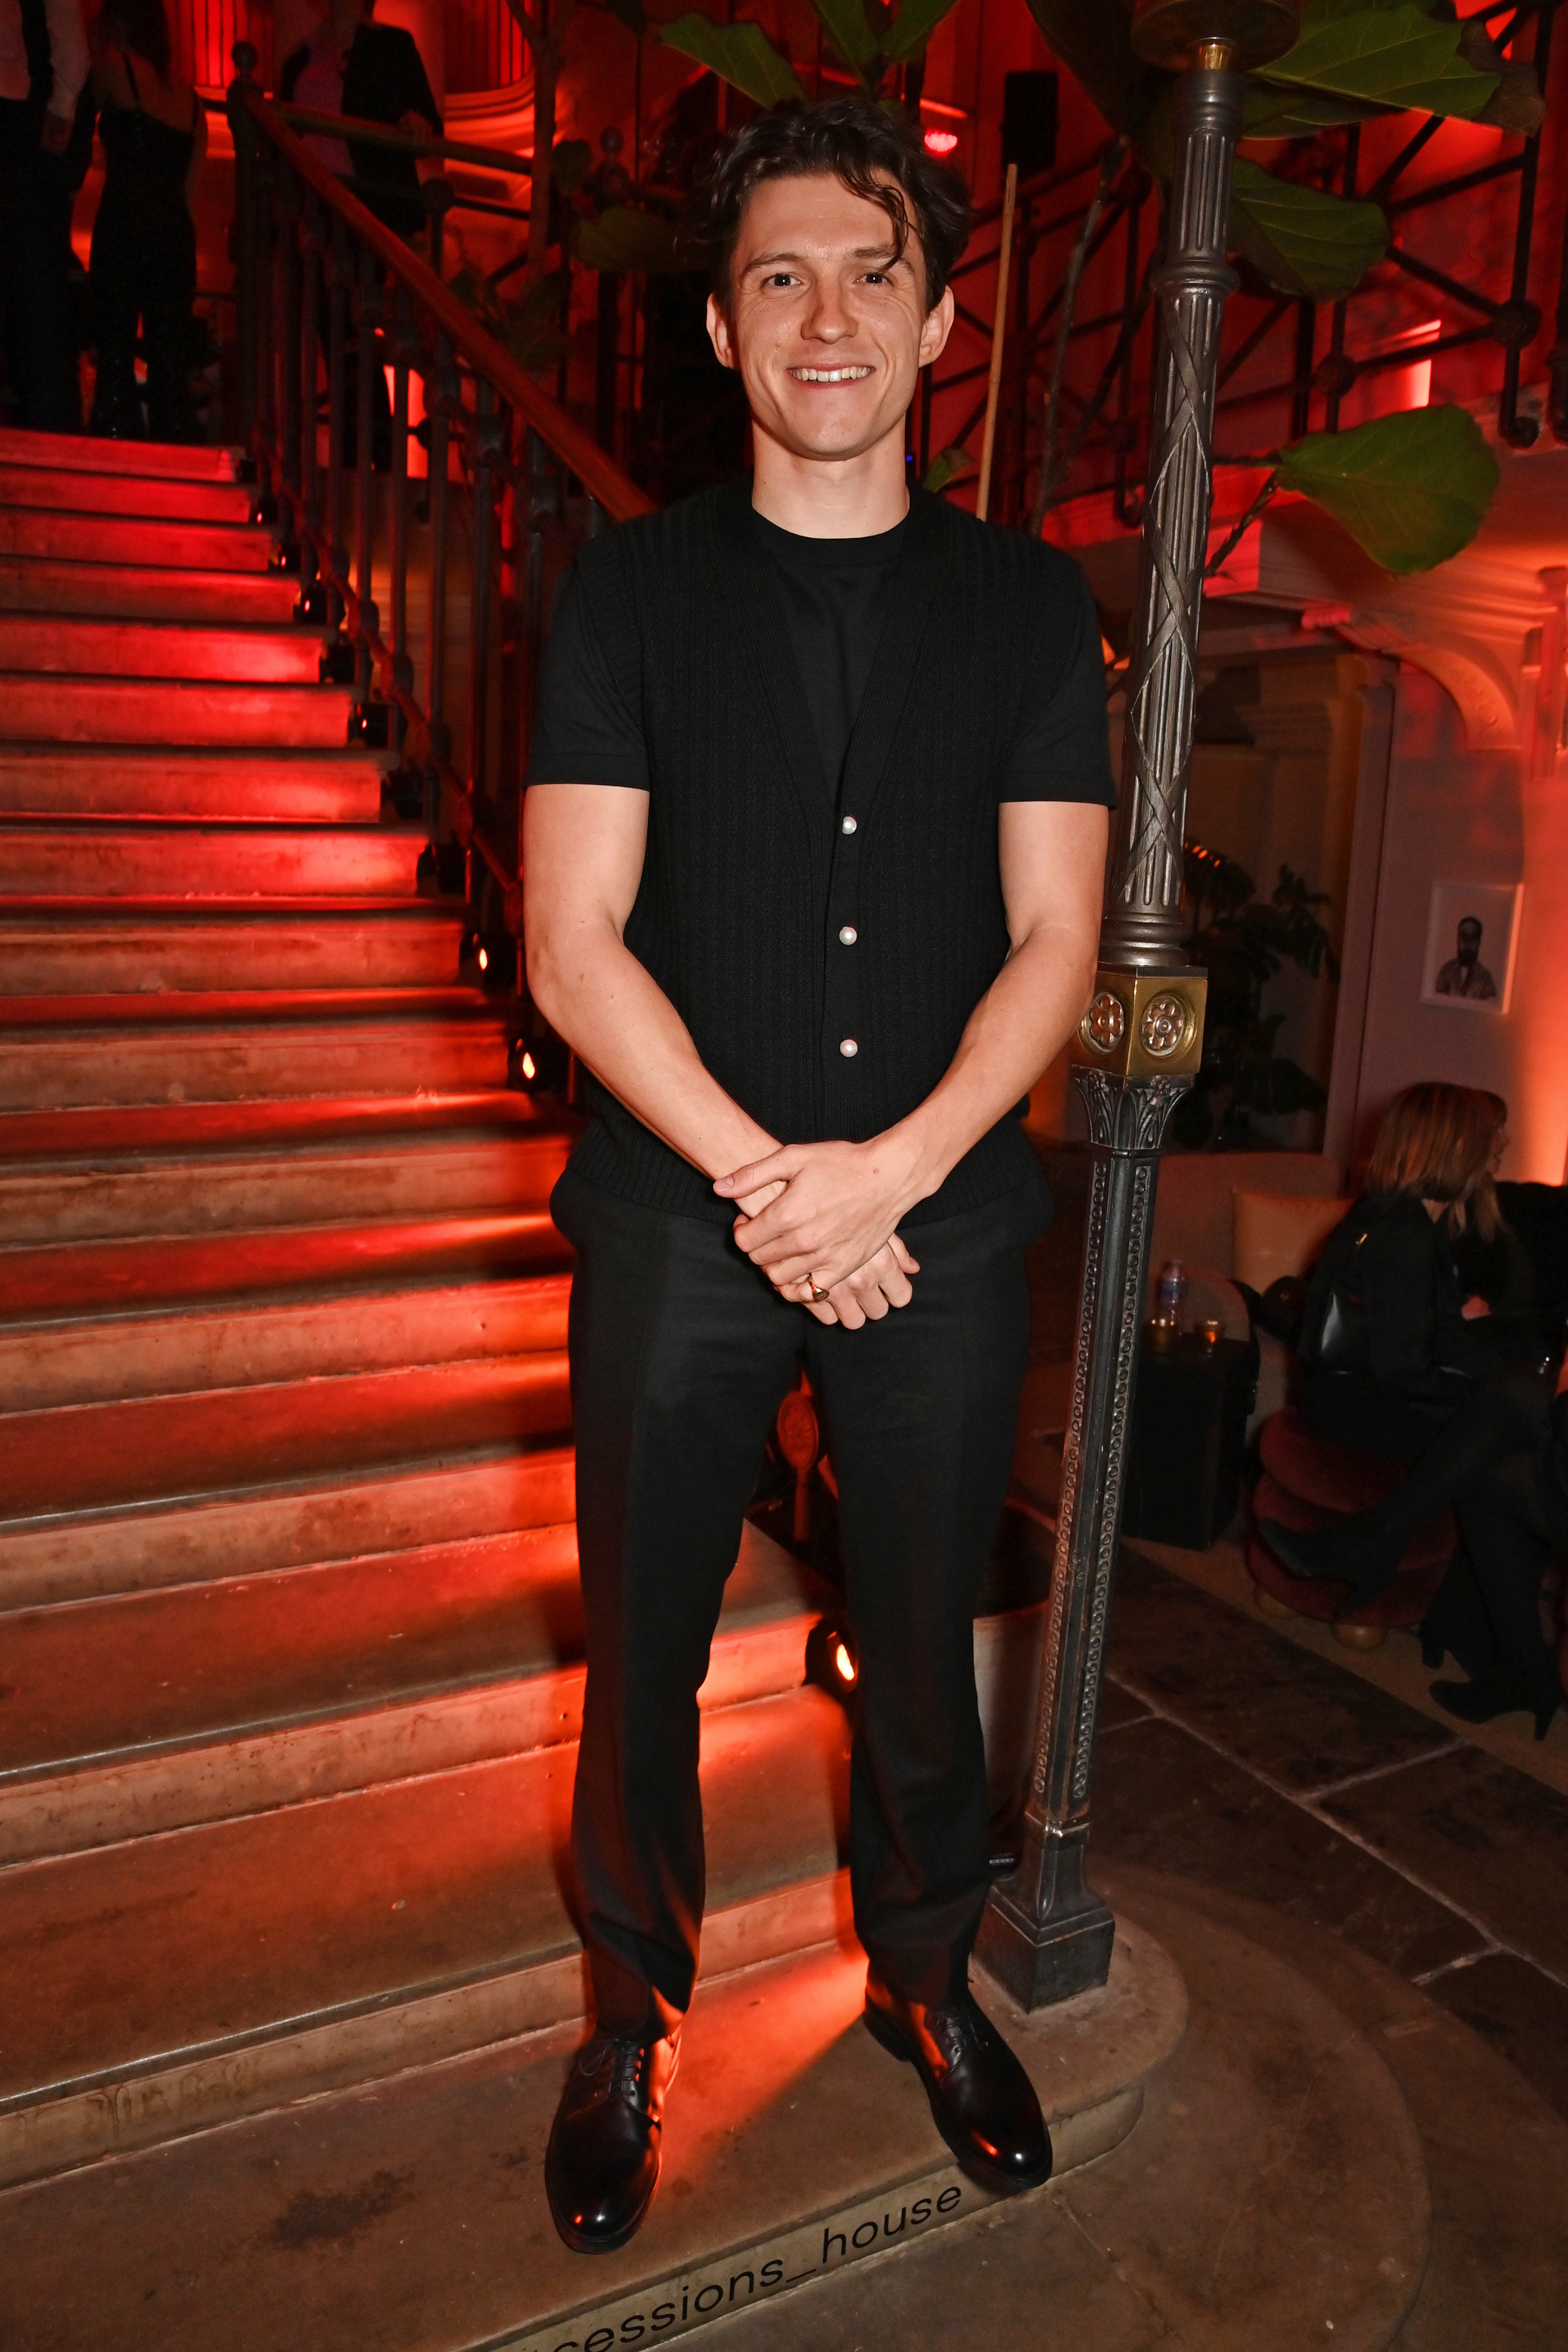 Tom Holland standing on stairs at an event, wearing a short-sleeve black shirt and trousers with shiny black shoes